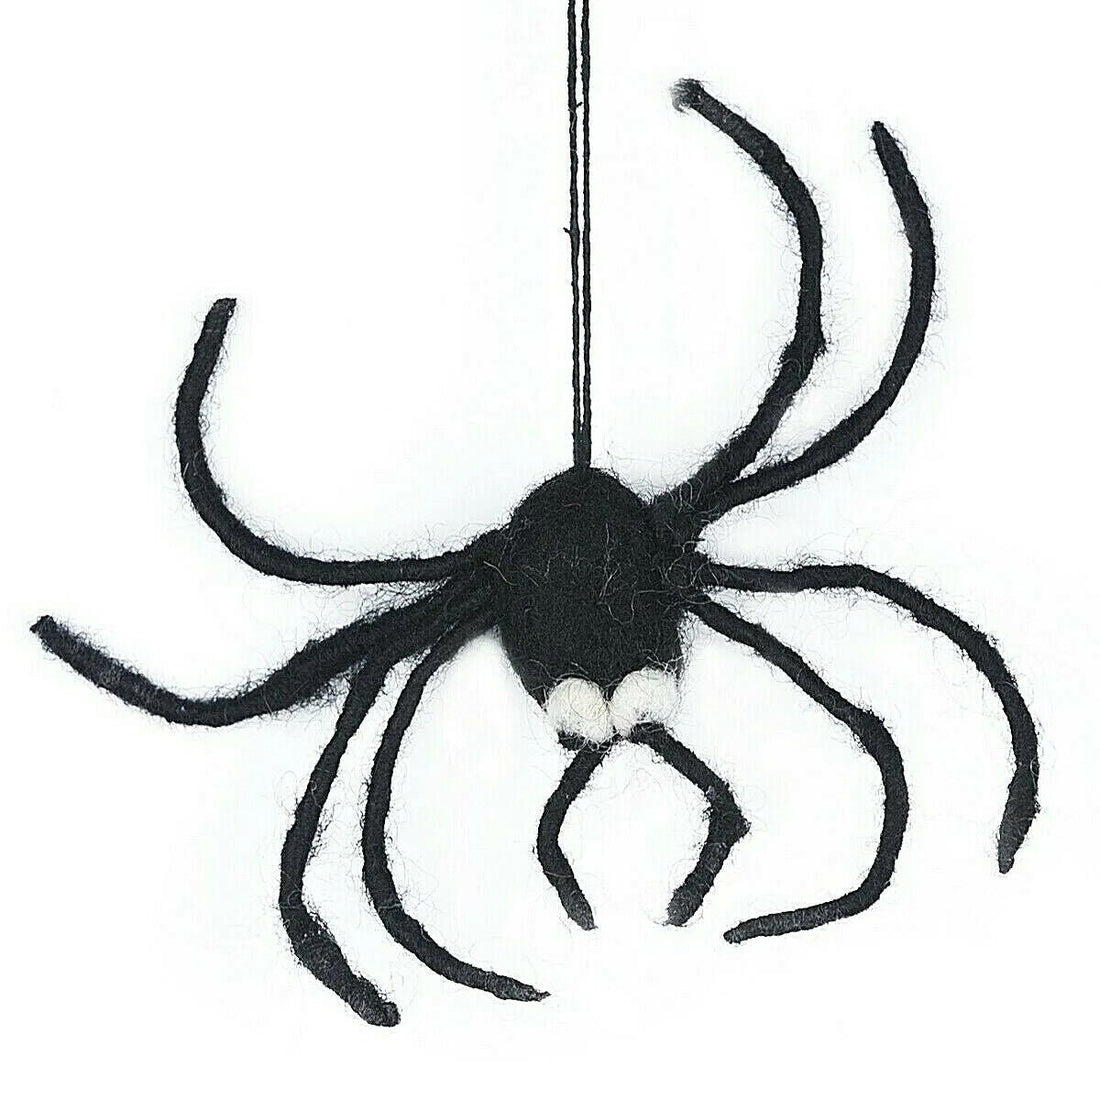 Primitive Folk Art Handmade Felted Wool Spider Ornaments - The Primitive Pineapple Collection